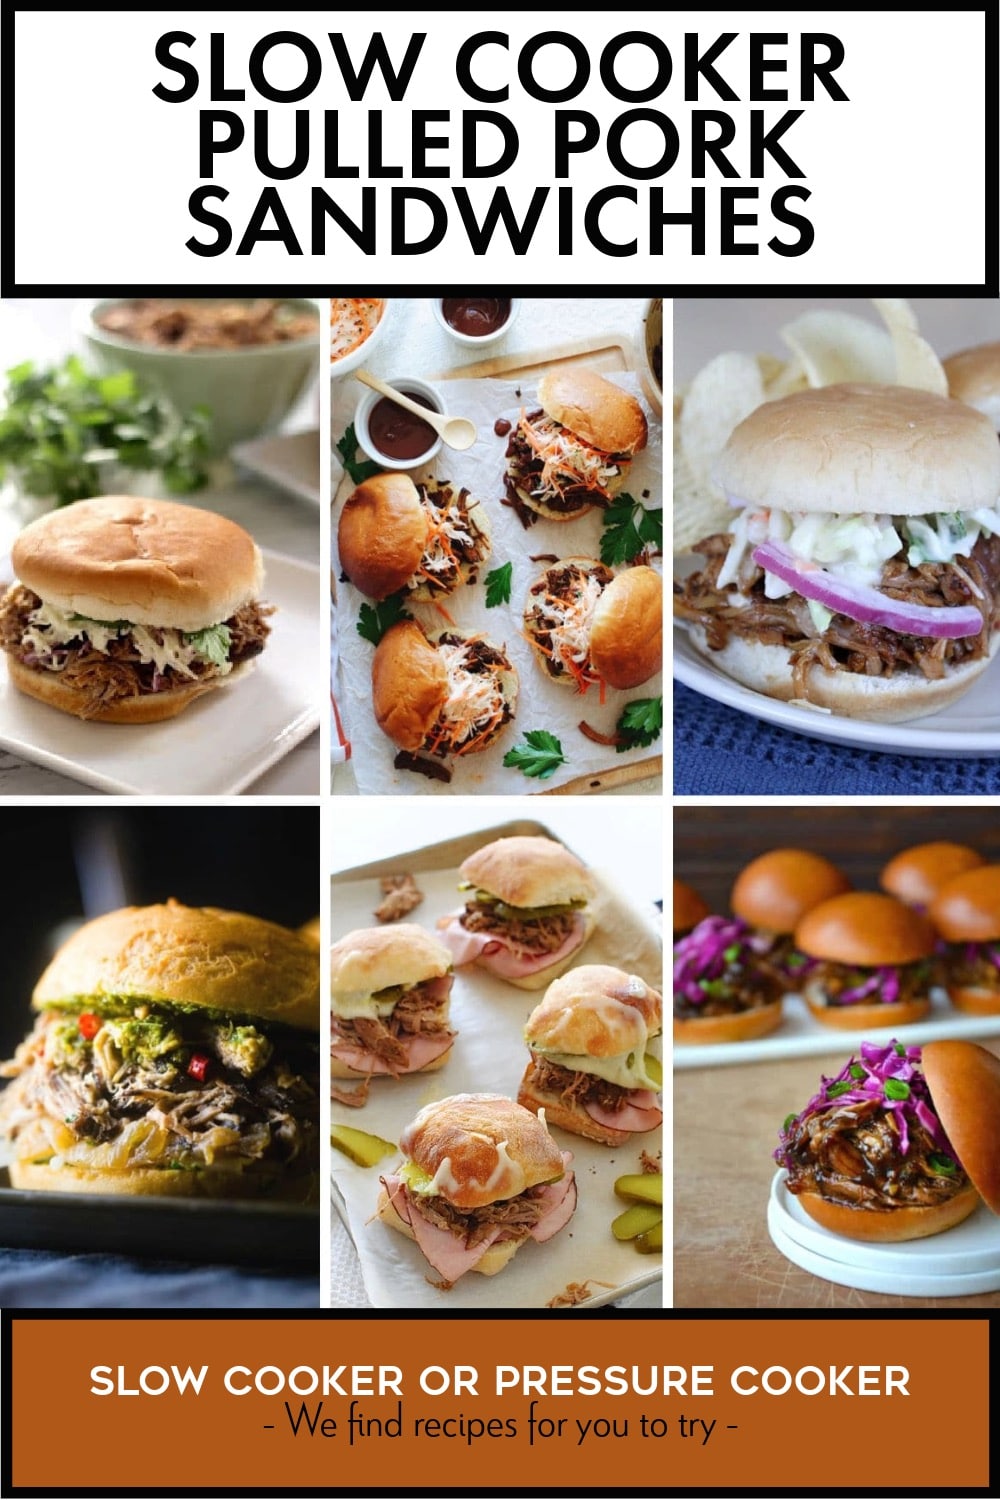 Pinterest image of Slow Cooker Pulled Pork Sandwiches